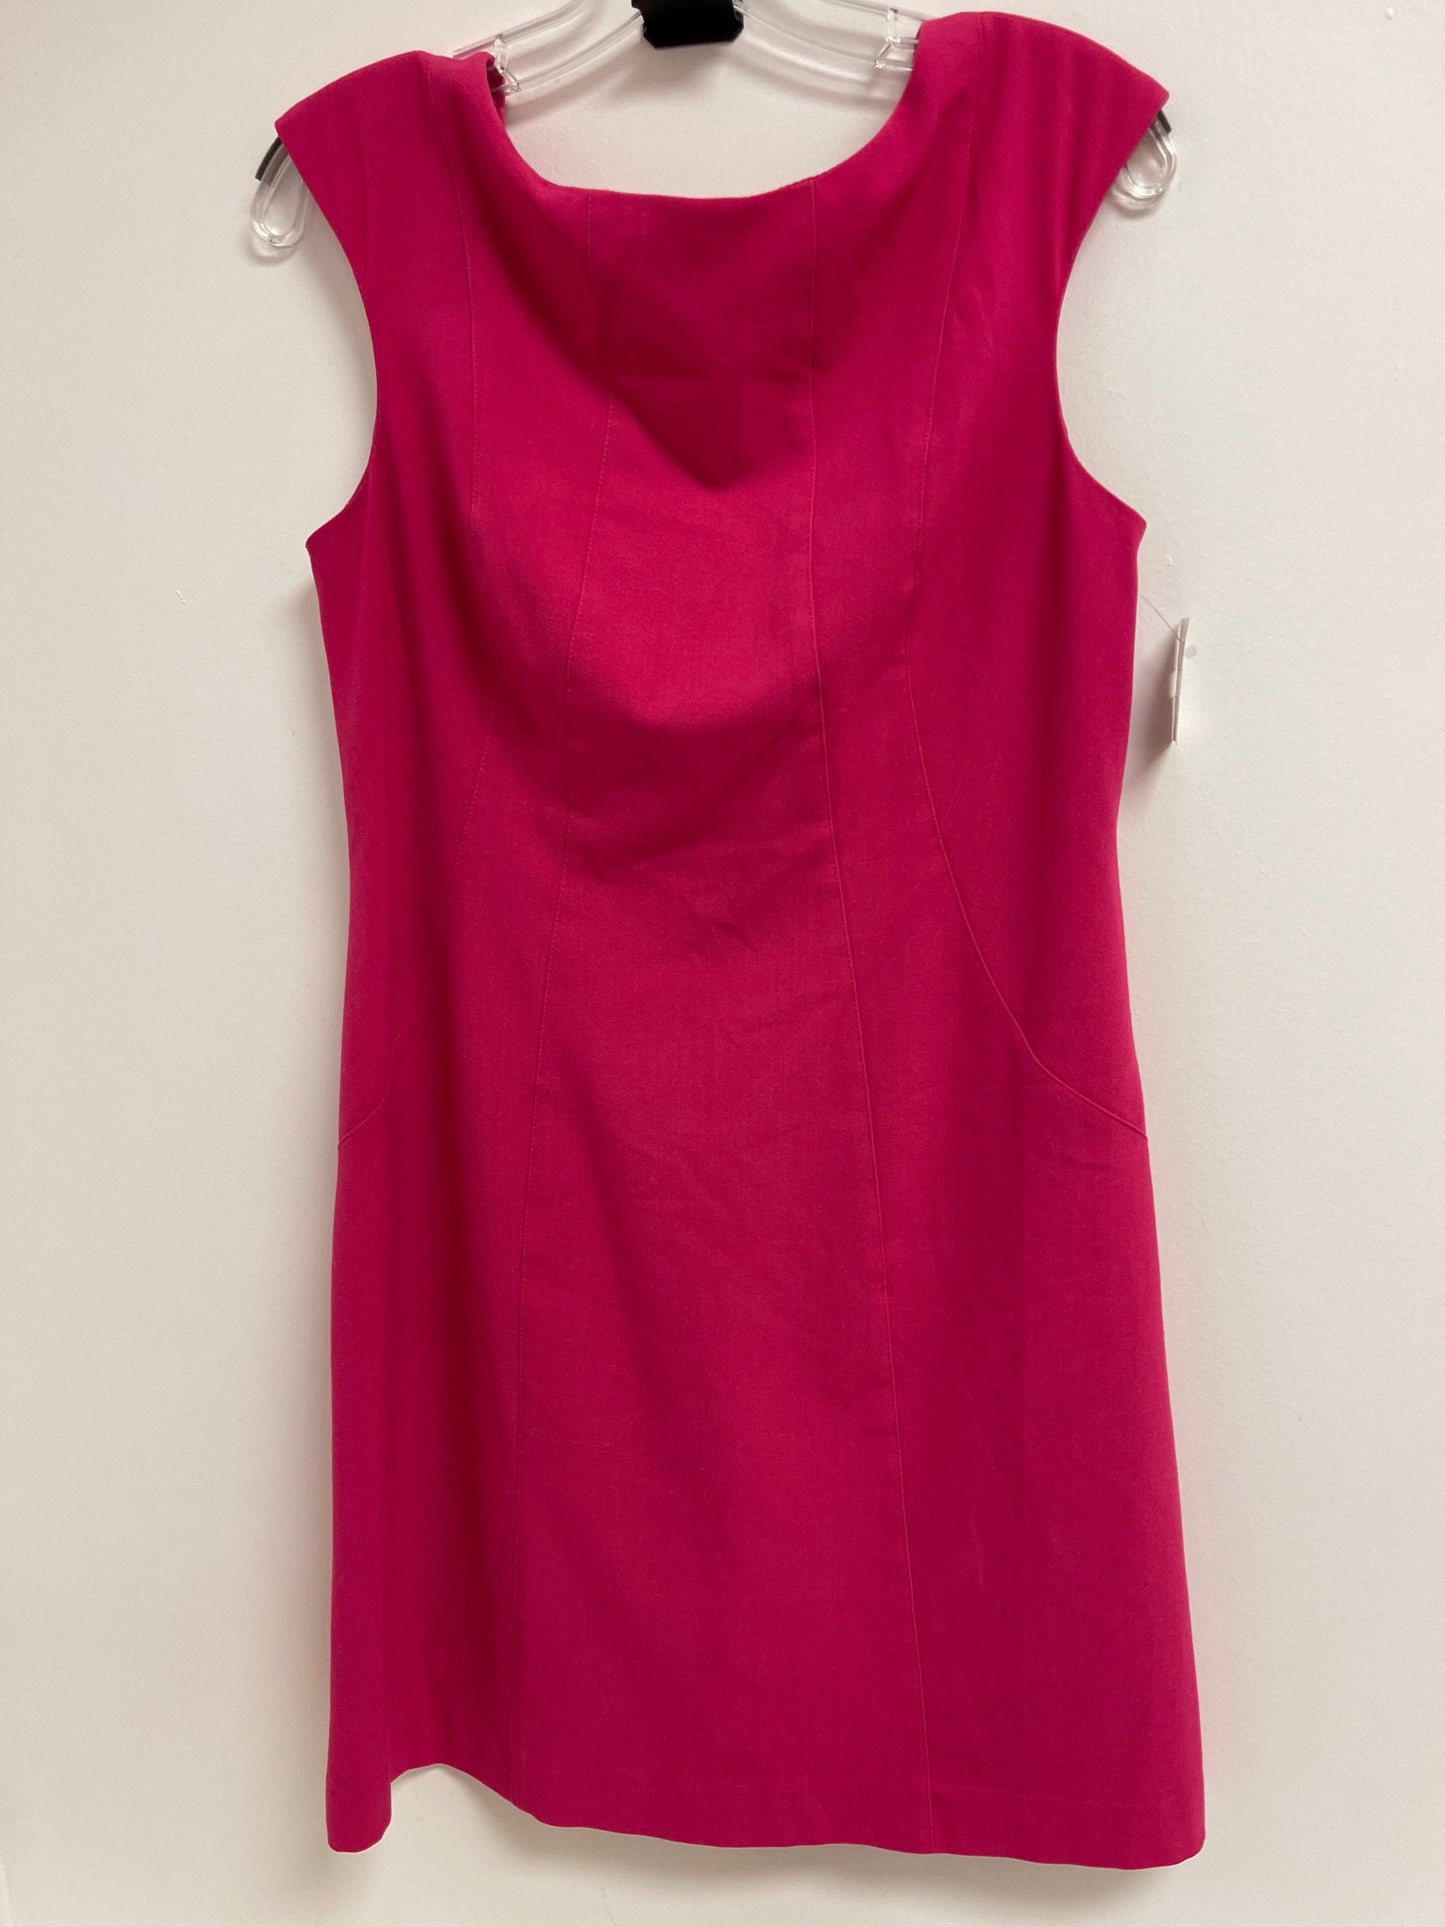 Pink Dress Casual Short Vince Camuto, Size 8